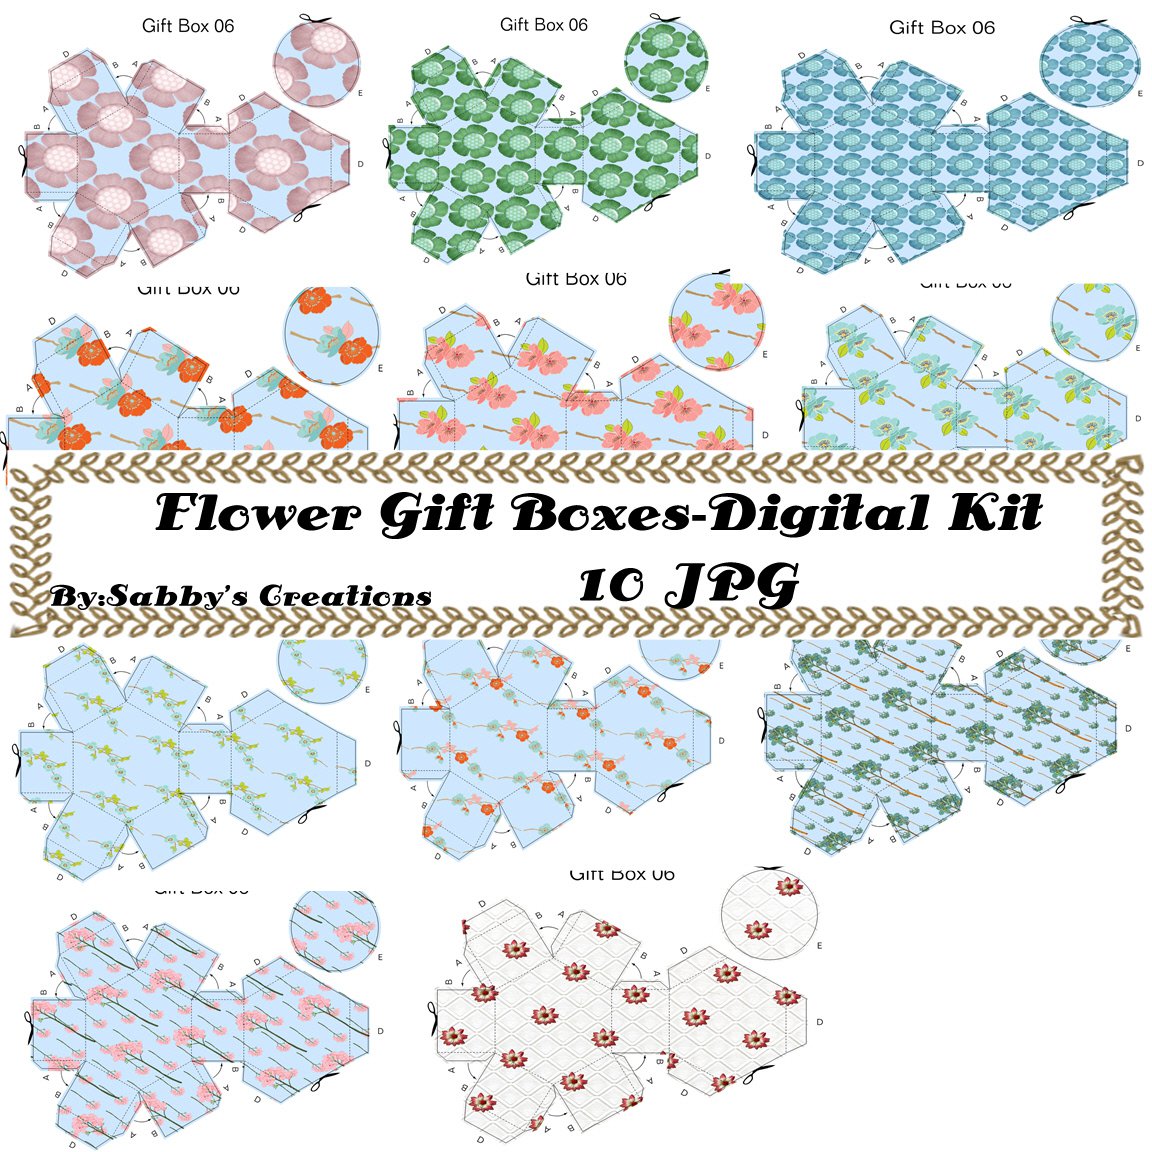 Flower Gift Boxes46 Digital Kit-Mothers Day-Paper-ArtClip-Gift Tag-Jewelry